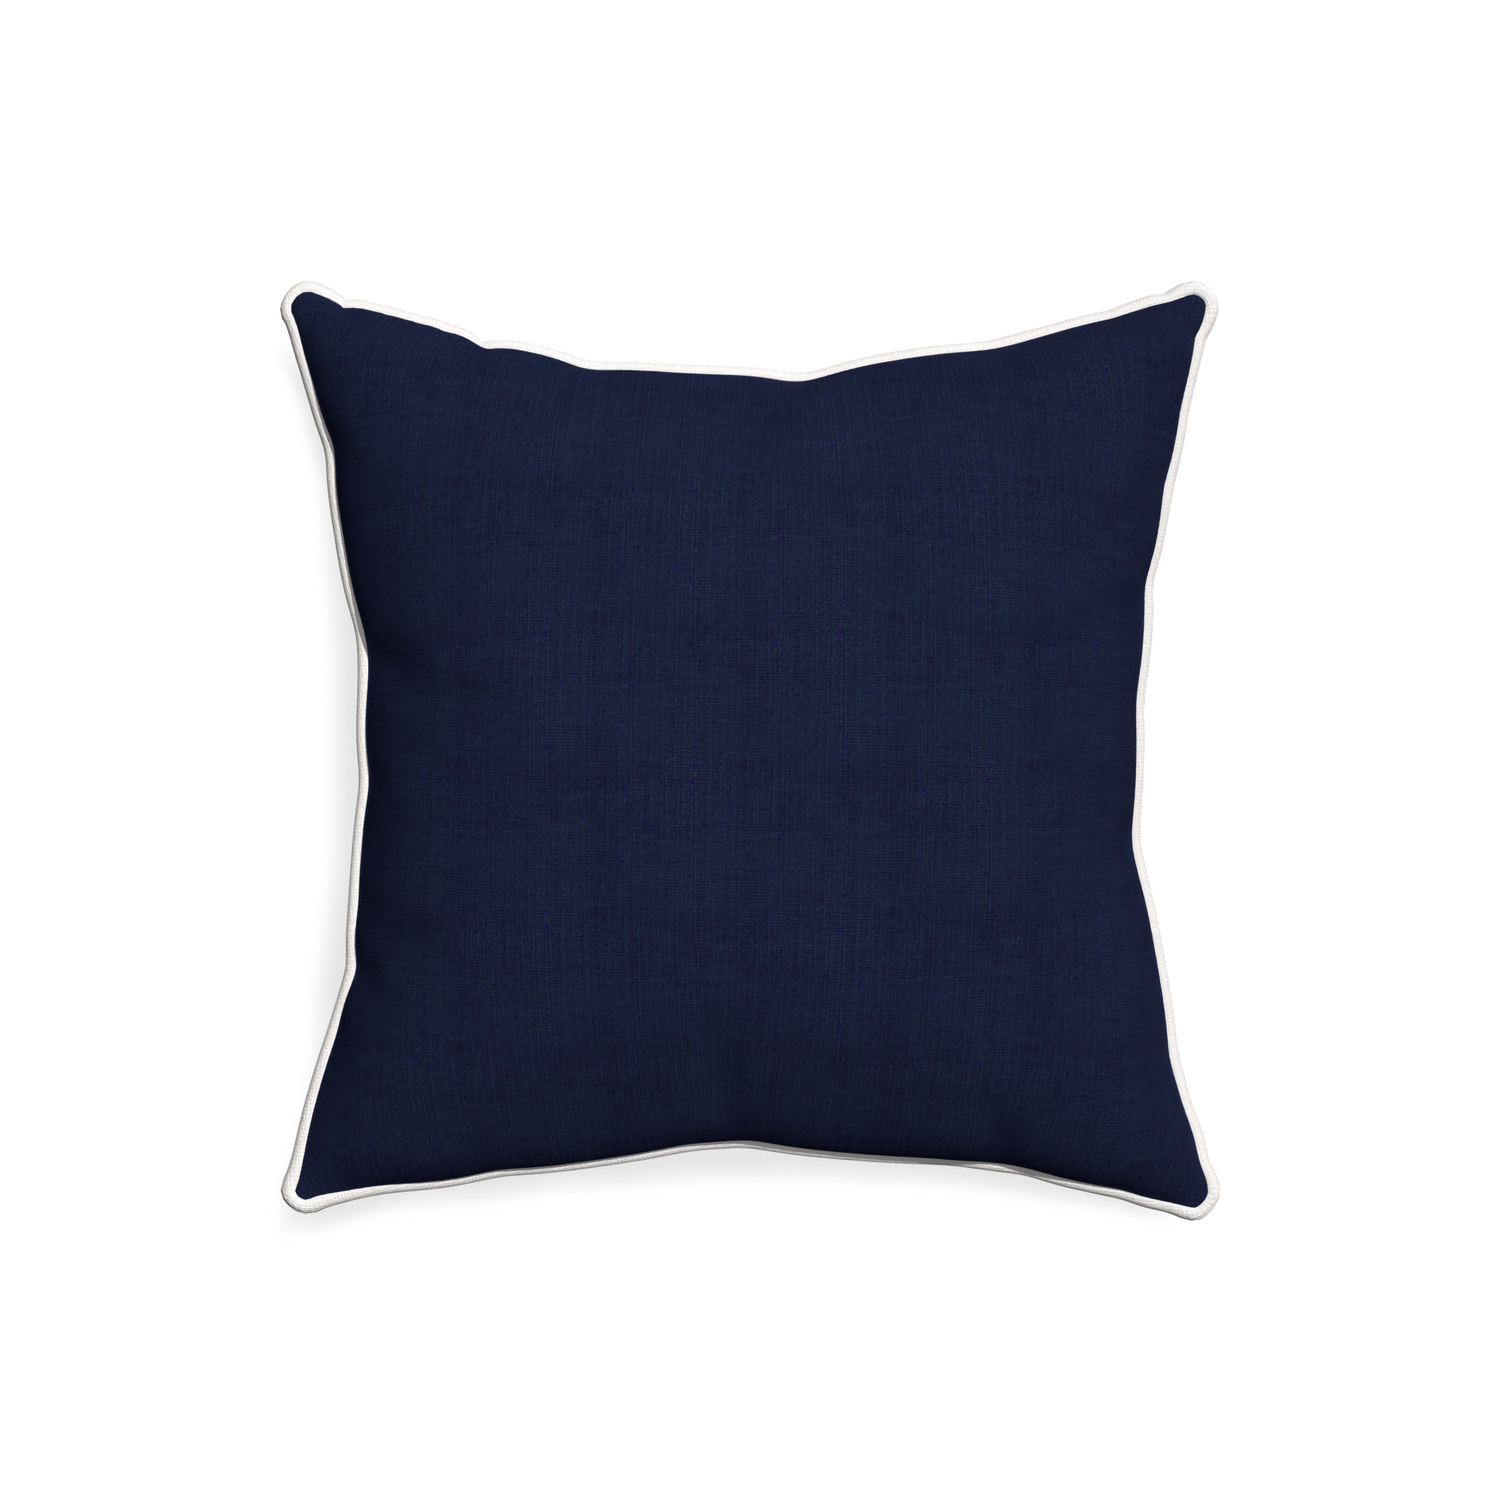 20-square midnight custom navy bluepillow with snow piping on white background